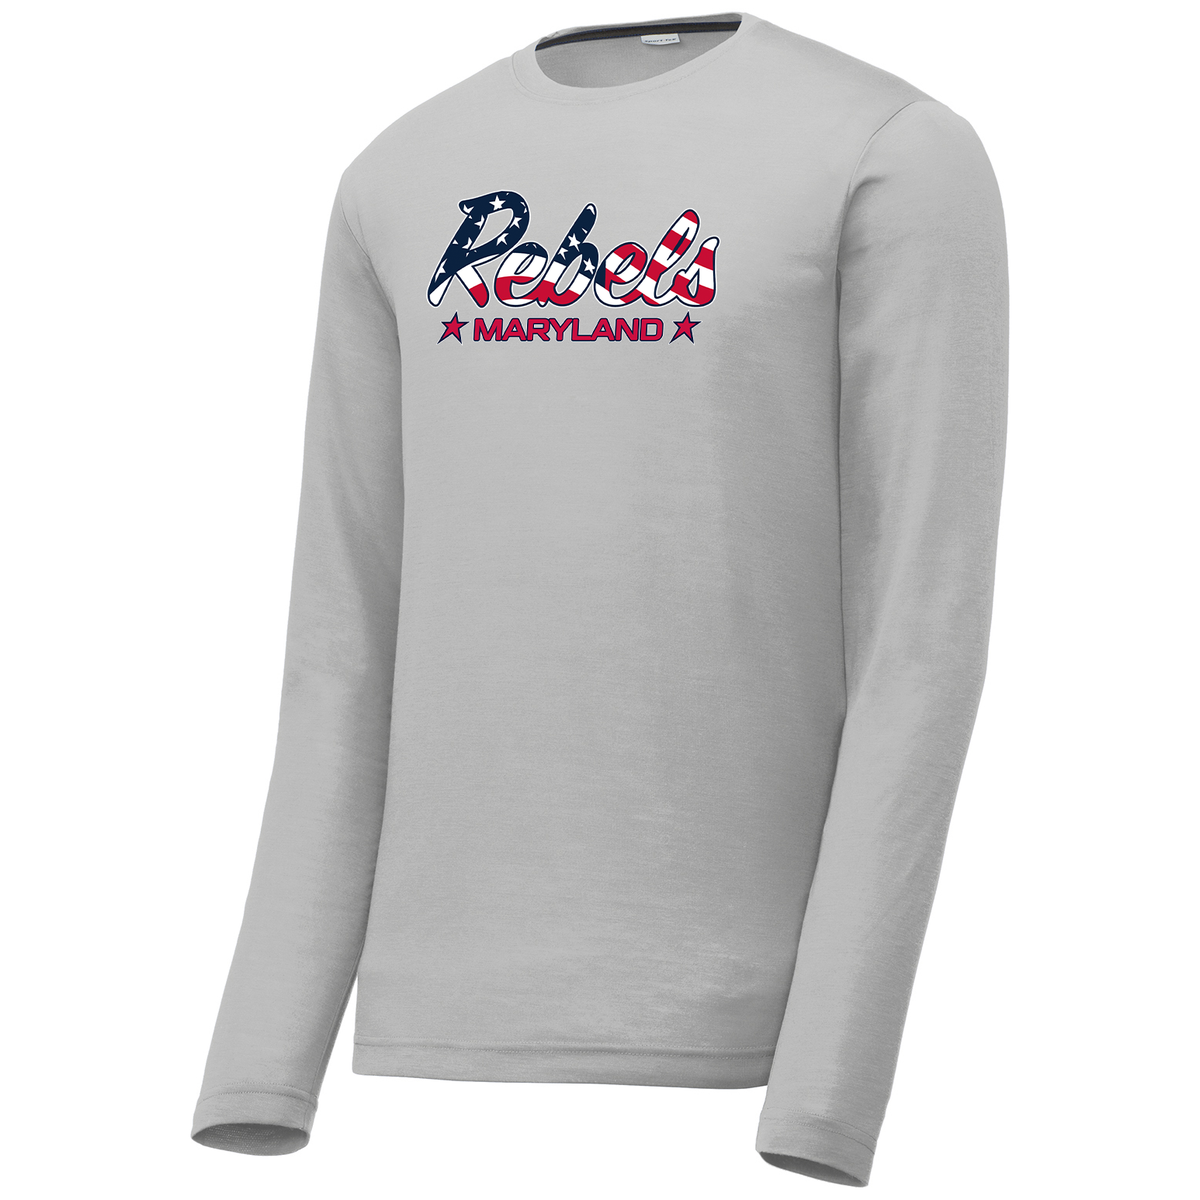 Rebels Maryland Long Sleeve CottonTouch Performance Shirt